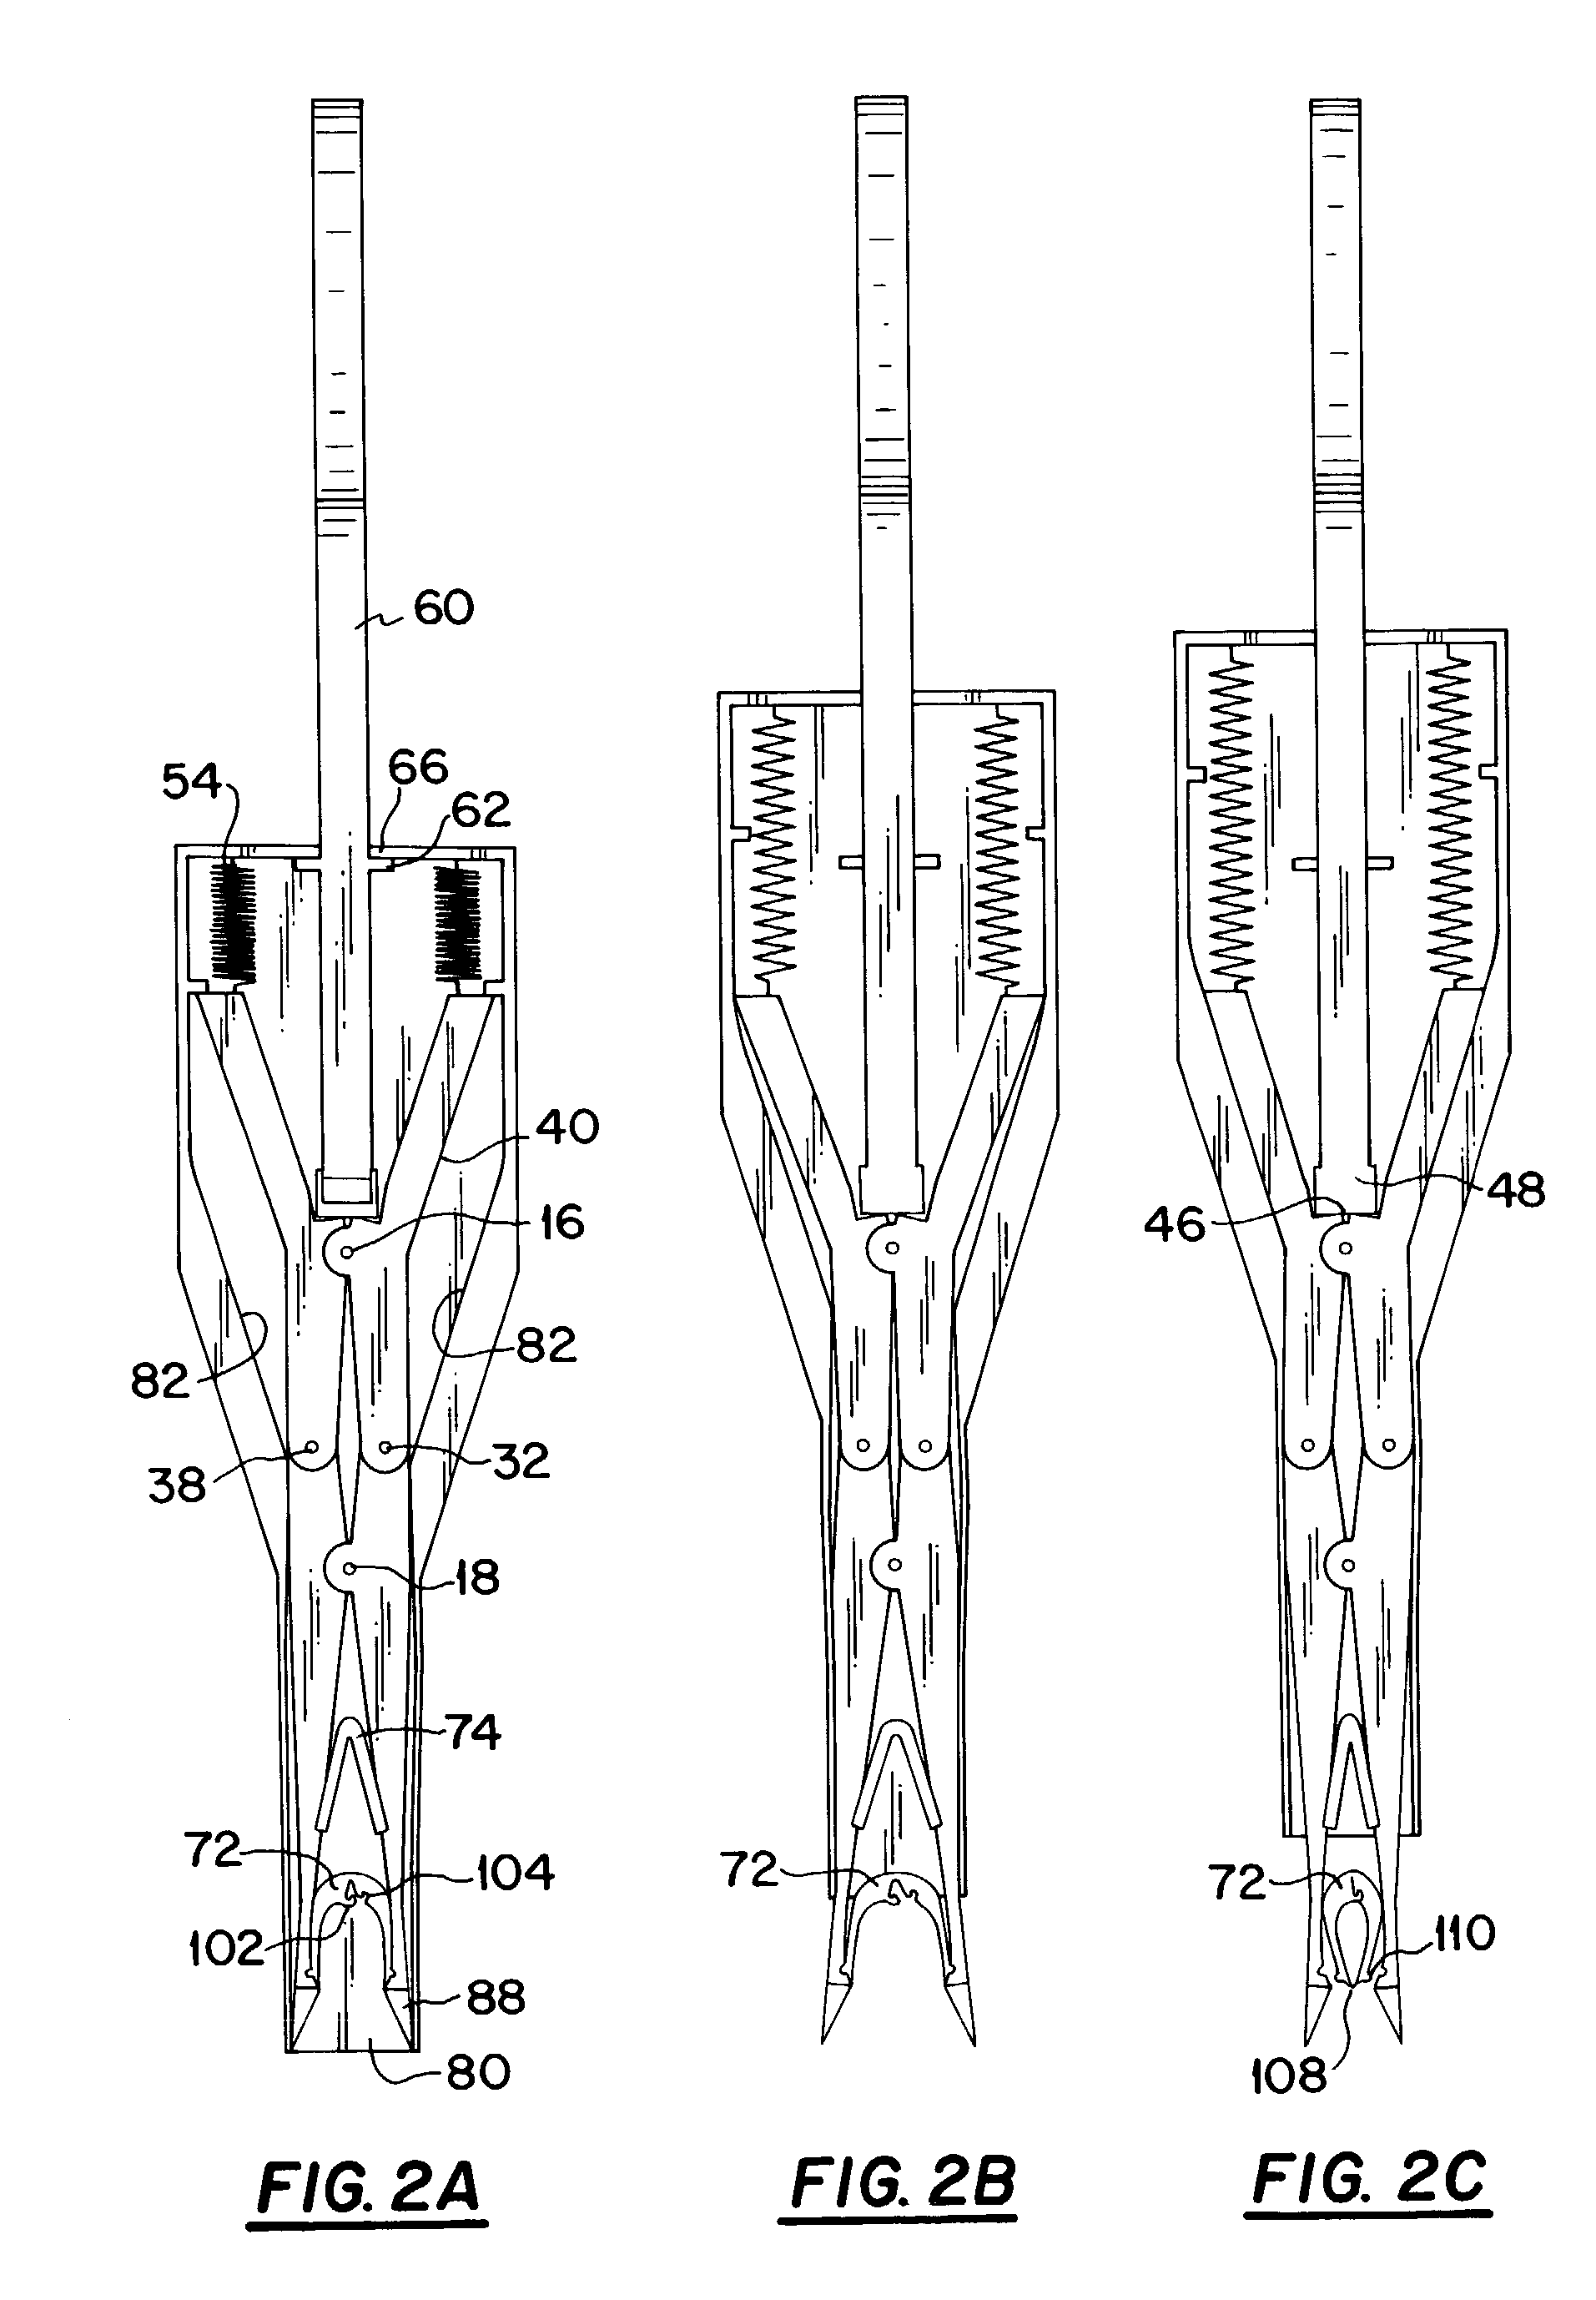 Stapling device for closure of deep tissue